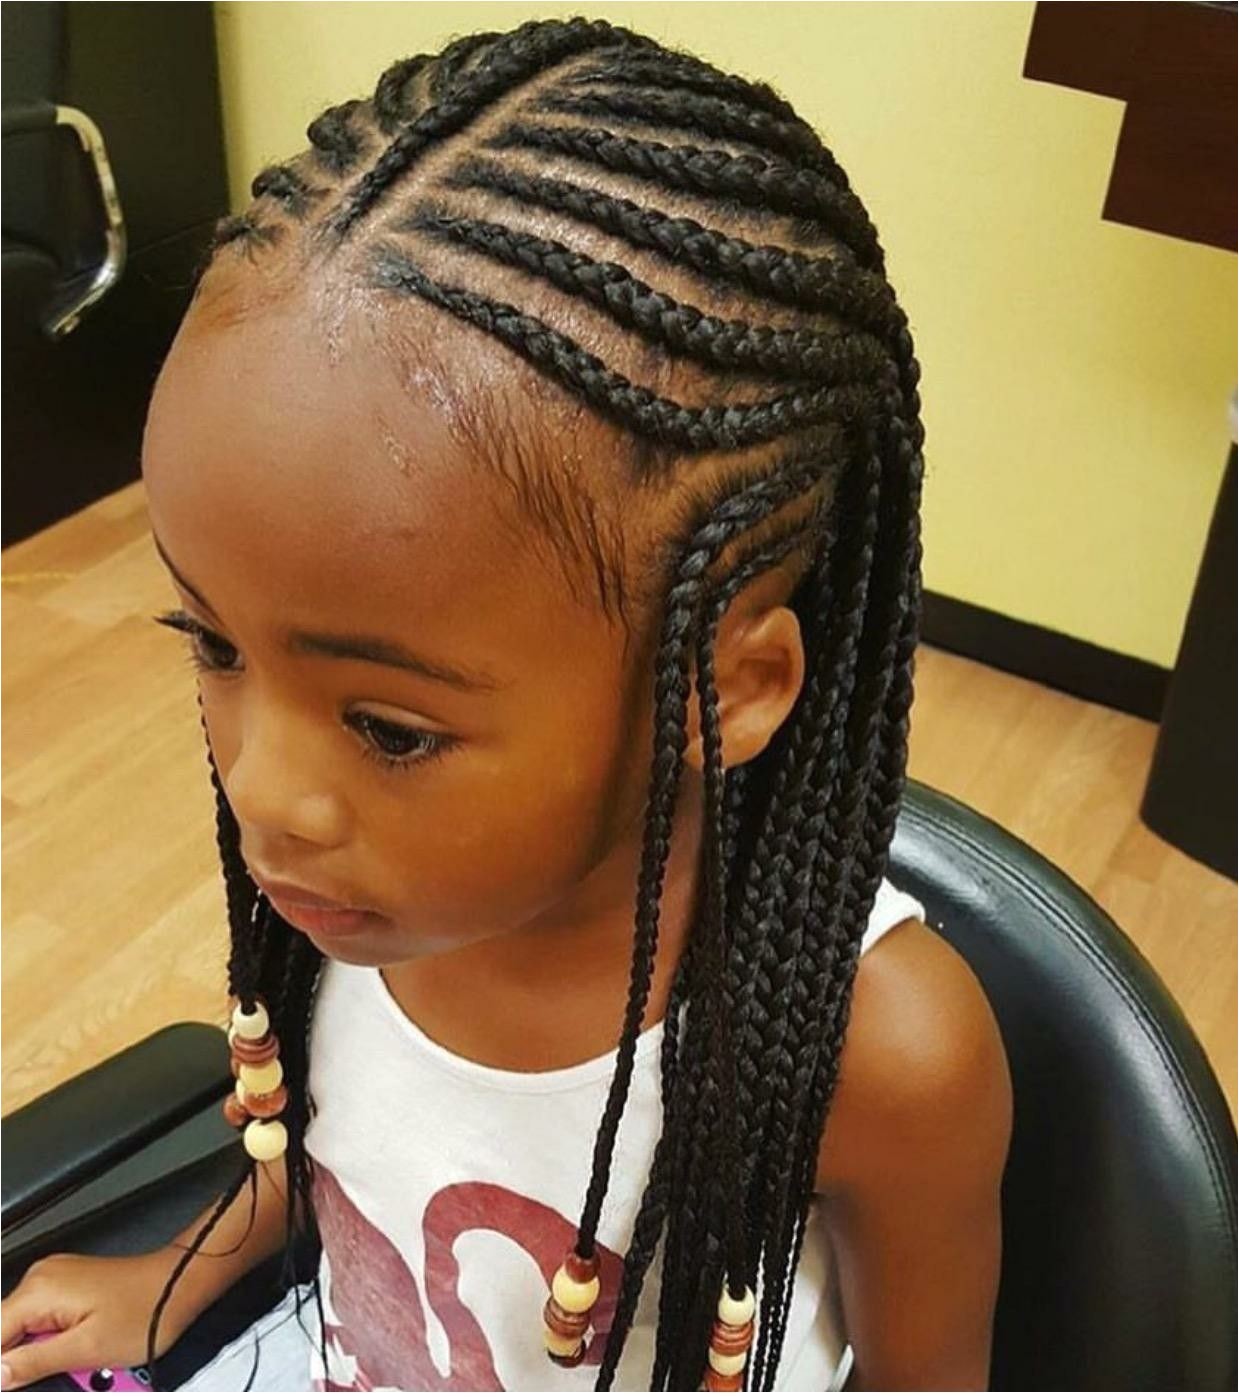 8 Year Old Black Girl Hairstyles Official Lee Hairstyles for Gg & Nayeli In 2018 Pinterest